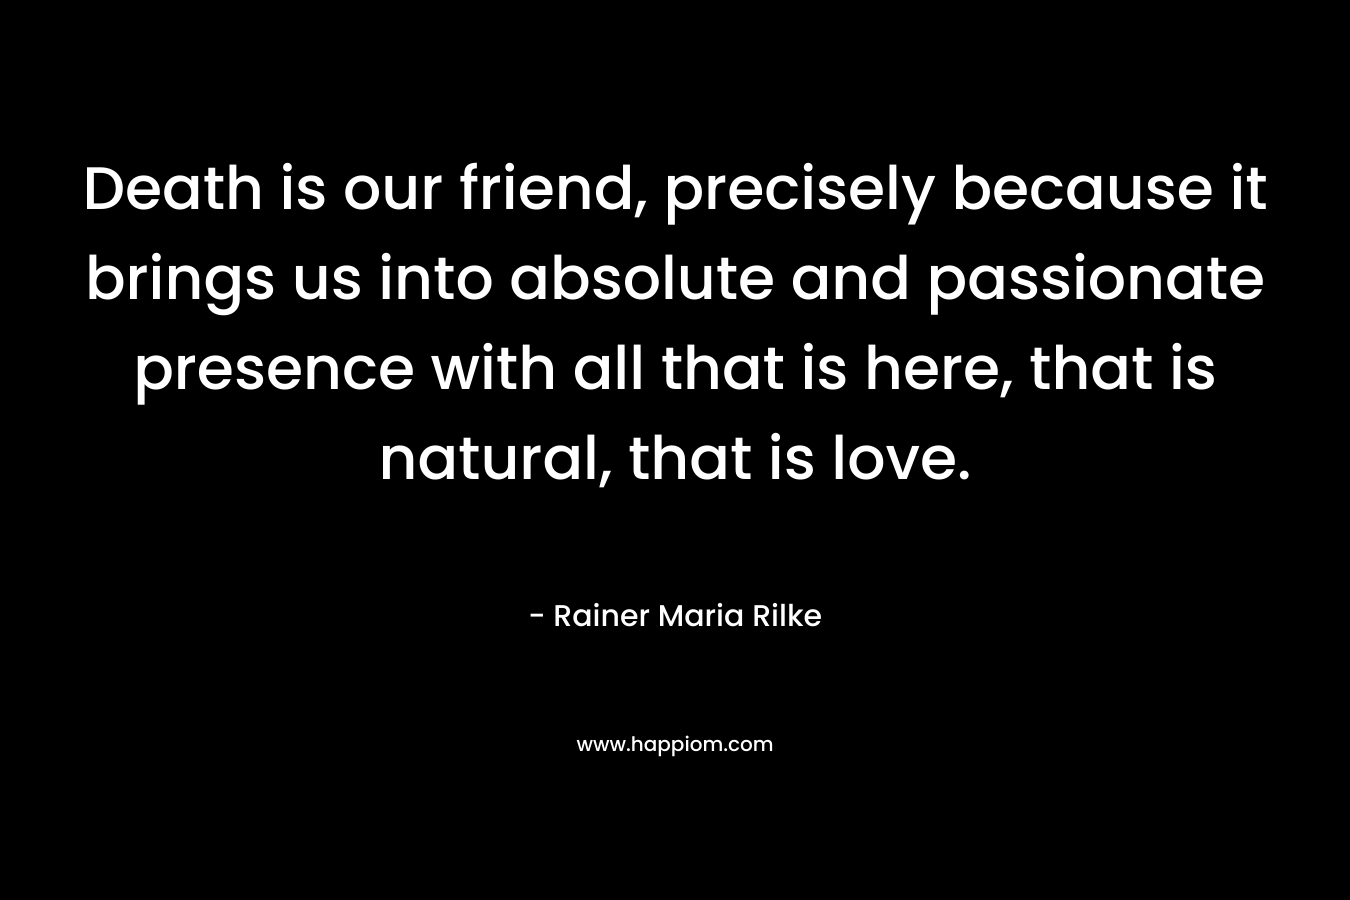 Death is our friend, precisely because it brings us into absolute and passionate presence with all that is here, that is natural, that is love. – Rainer Maria Rilke